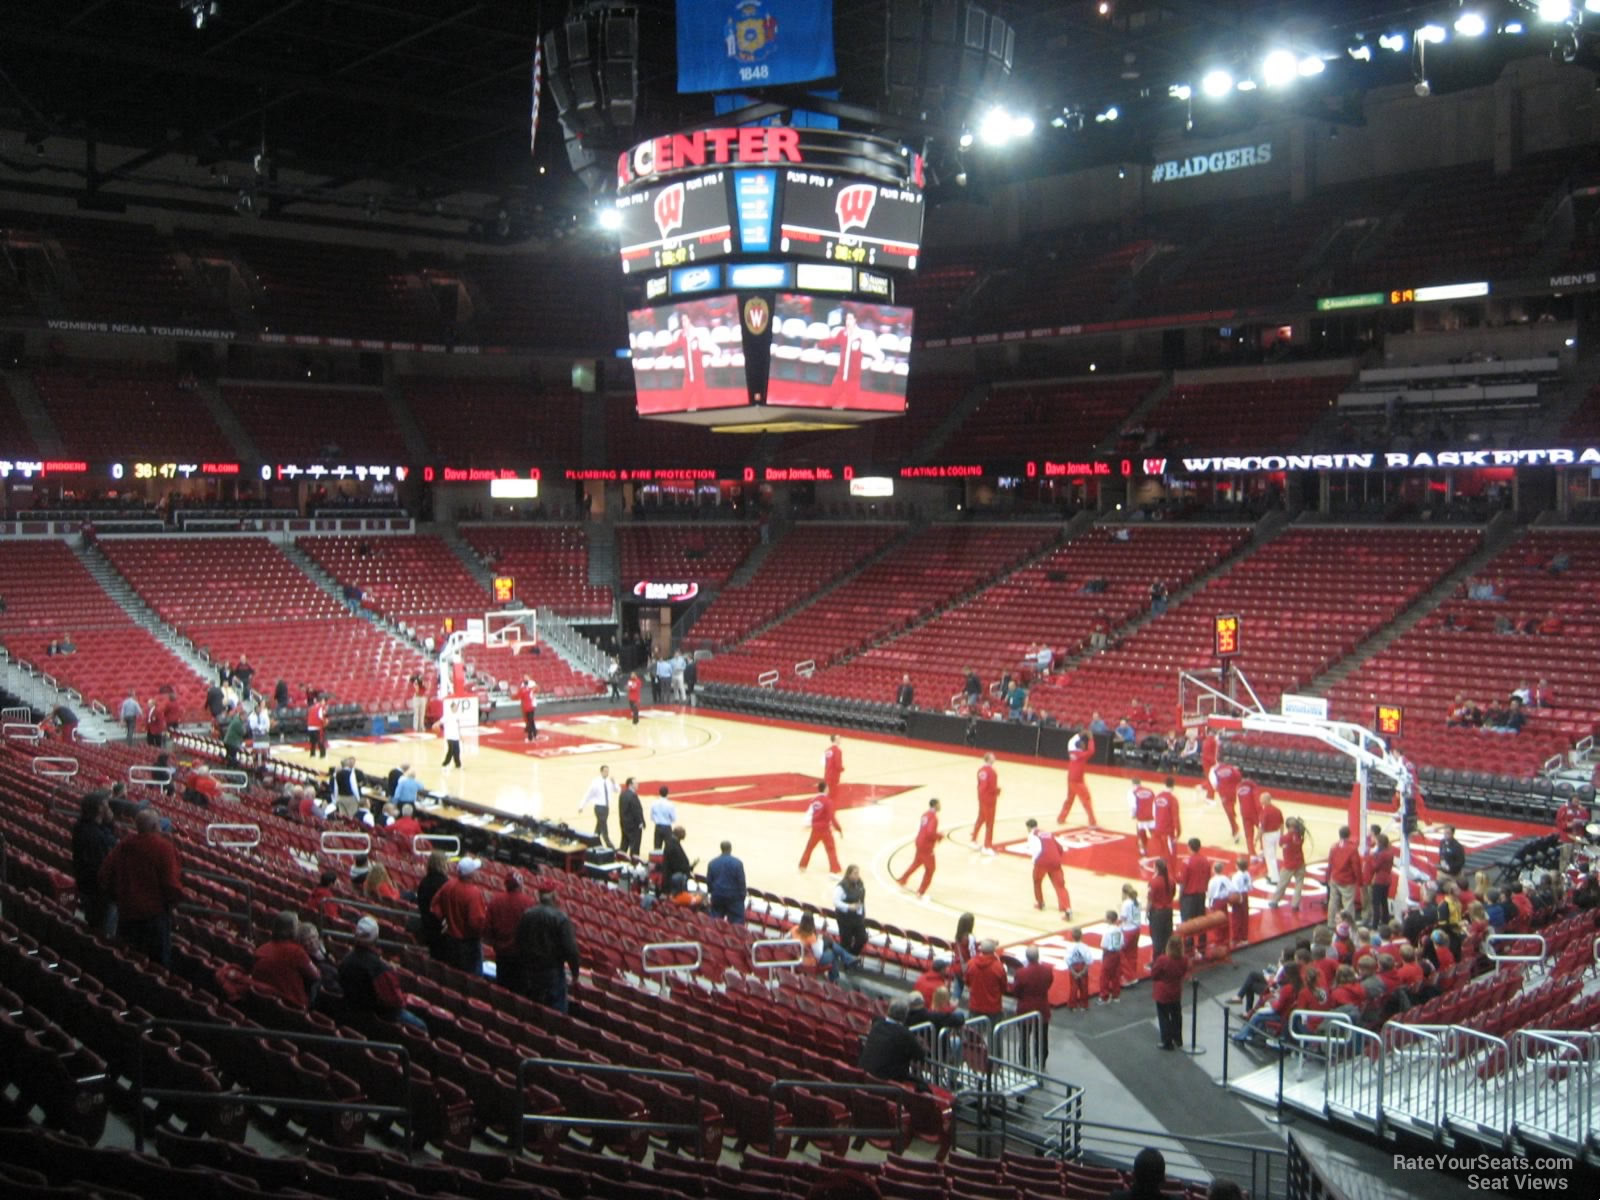 section 118 seat view  - kohl center